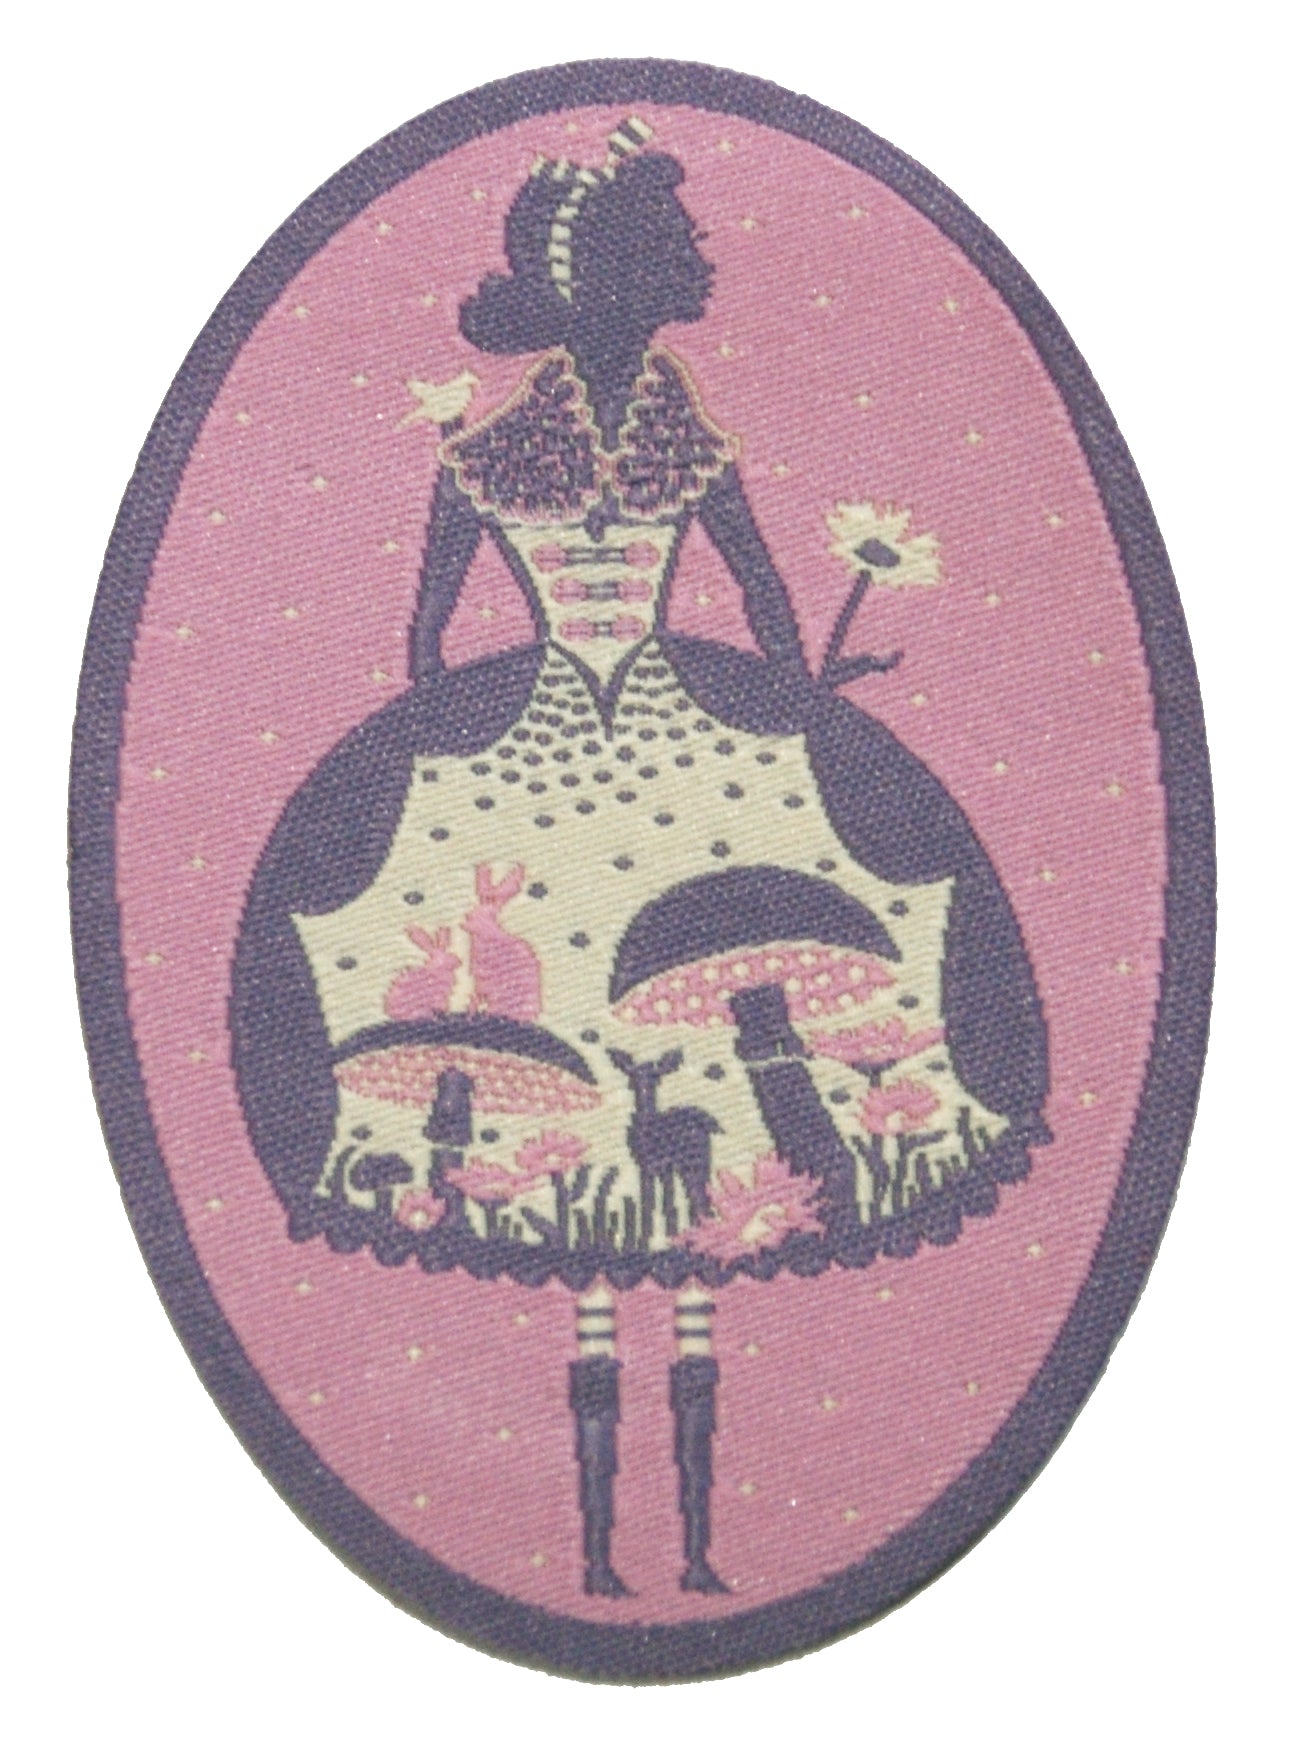 Pink, grey and white Alice patch with daisies, deer and mushrooms